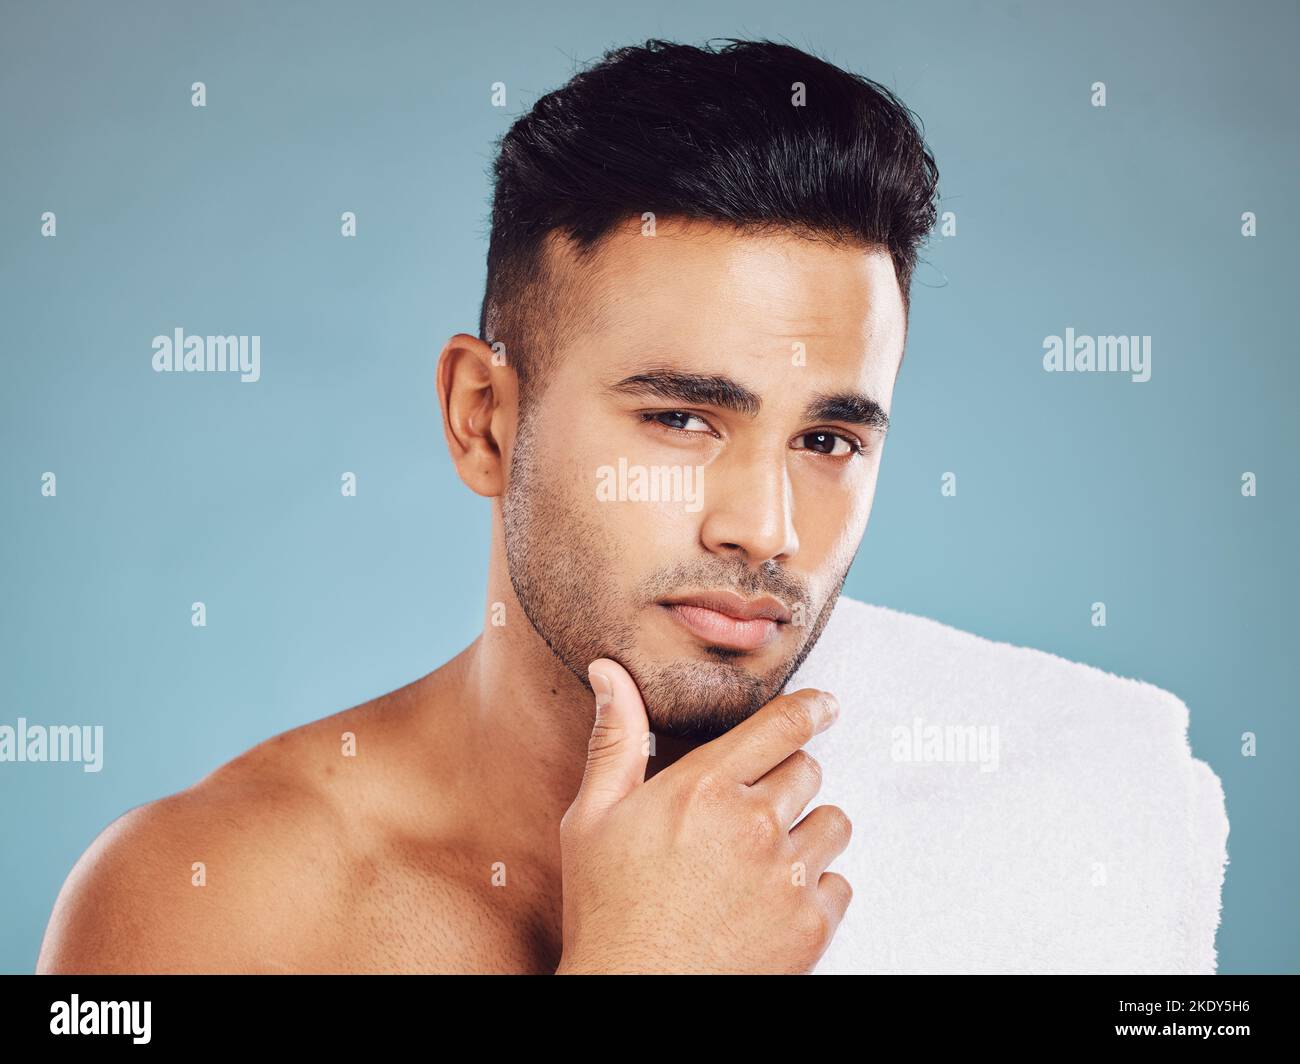 Man, hand on face and skincare cleaning or grooming cosmetics portrait in studio. Young Indian model, healthy facial care and body skin detox or Stock Photo